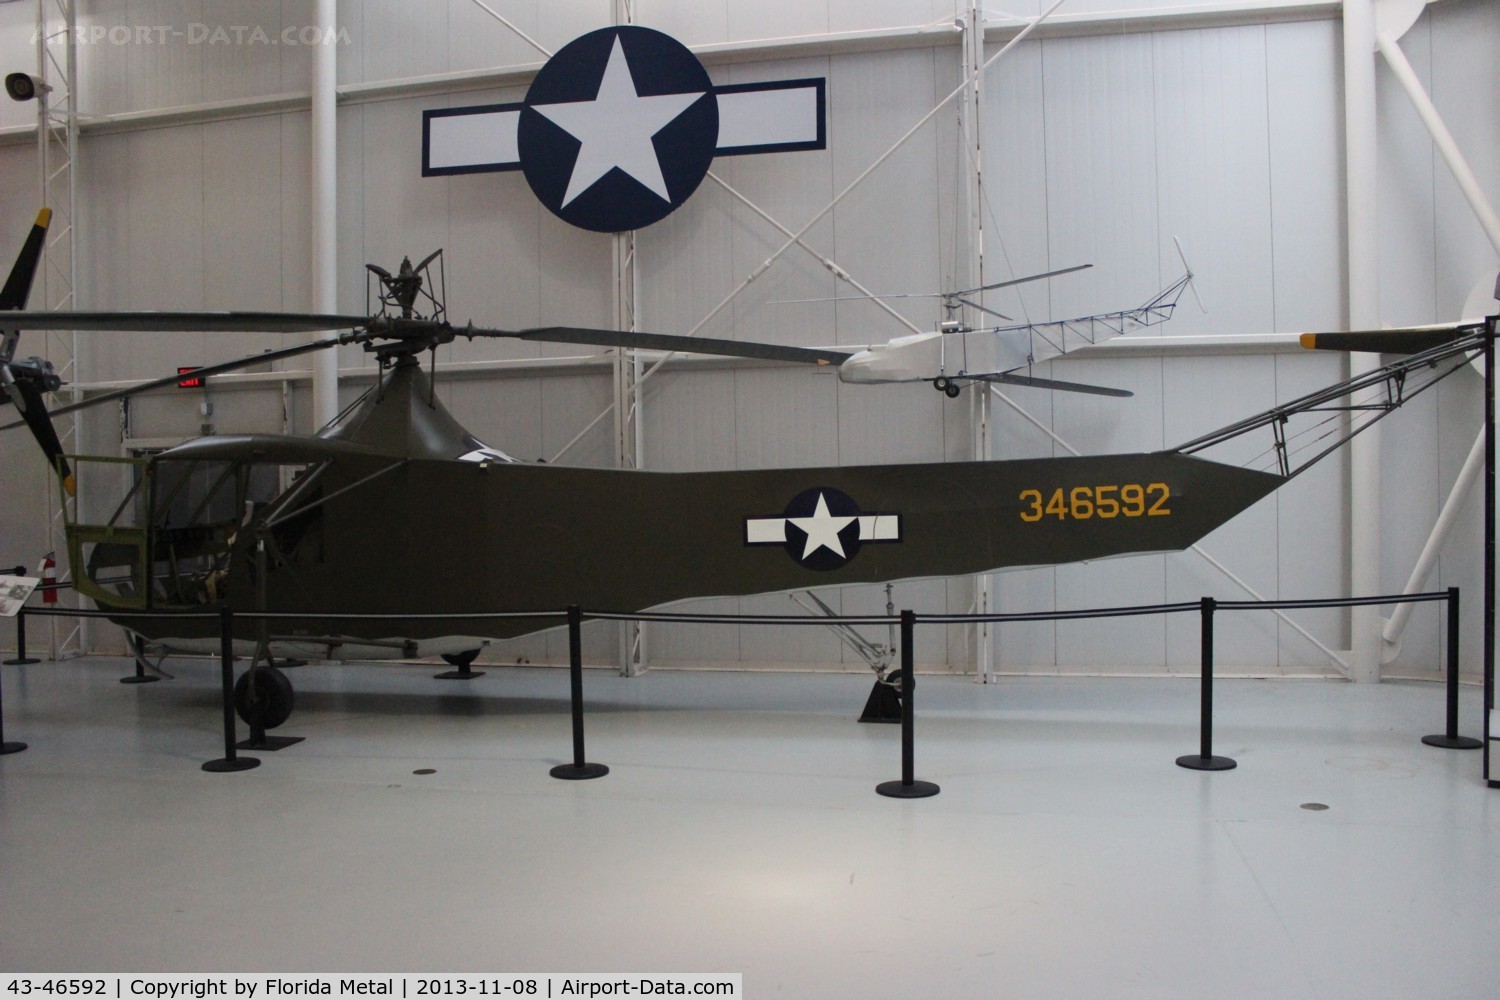 43-46592, 1943 Sikorsky R-4B Hoverfly C/N 136, R-4B Hoverfly at Ft. Rucker Army Aviation Museum